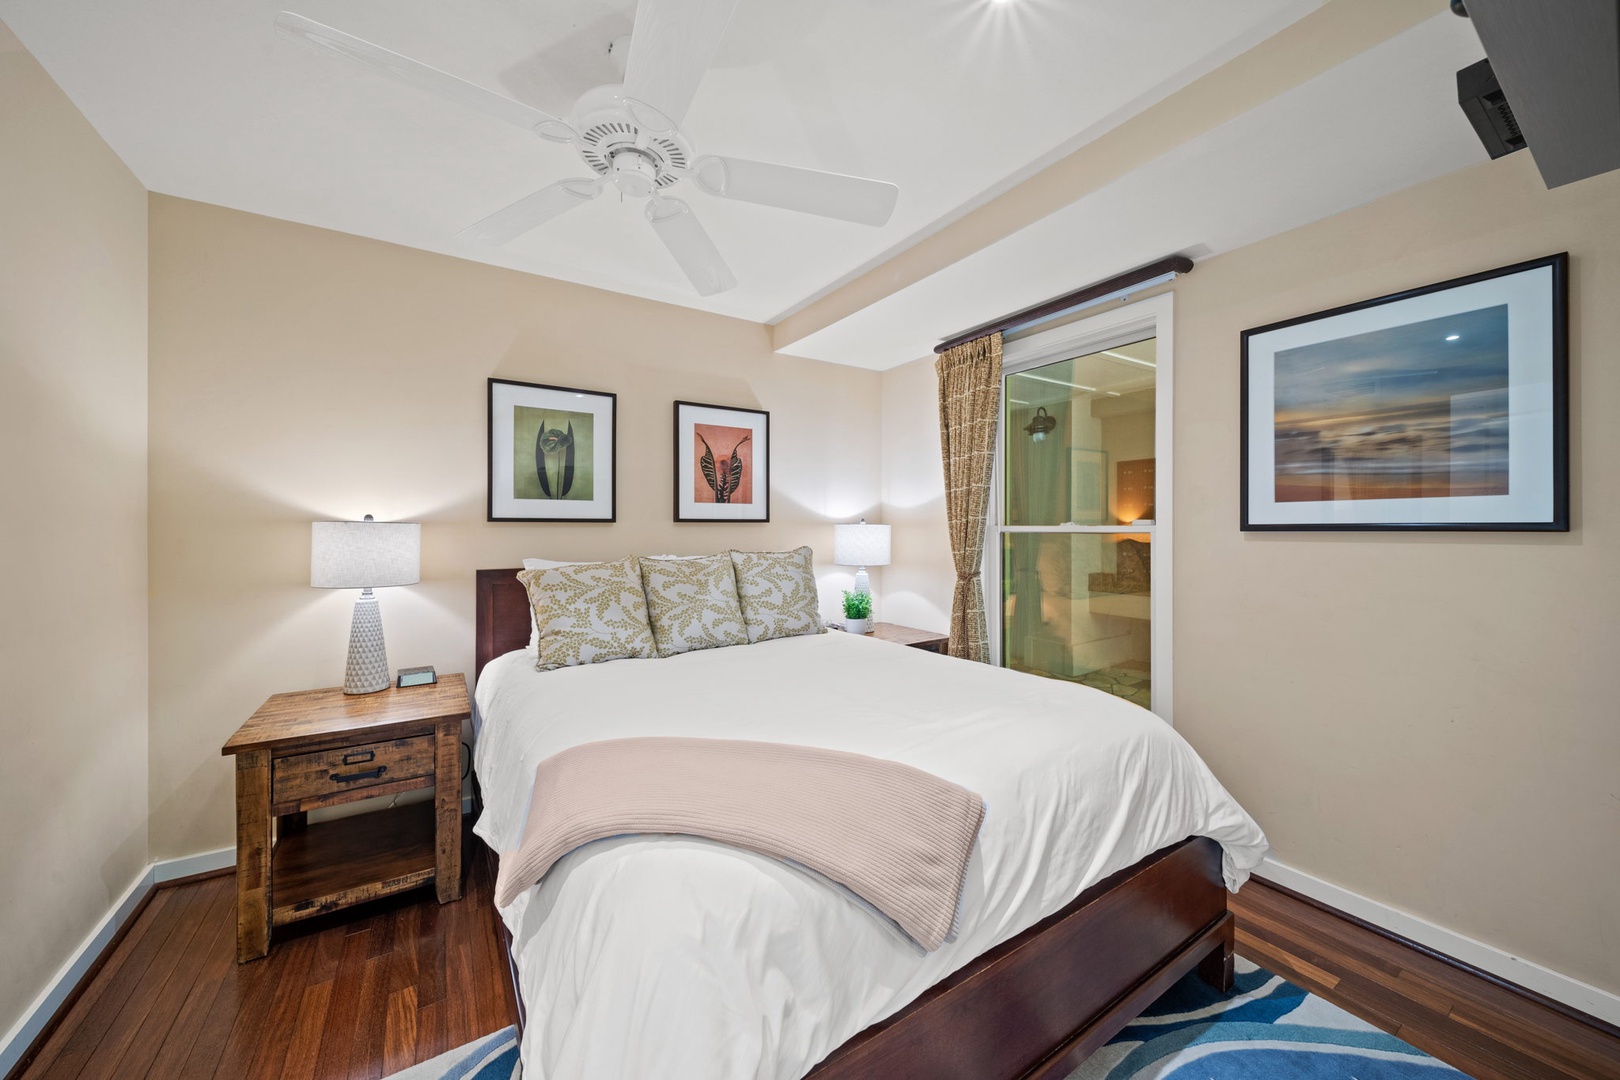 Kahuku Vacation Rentals, Turtle Bay Villas 114 - Guest Bedroom 3 is furnished with a queen bed